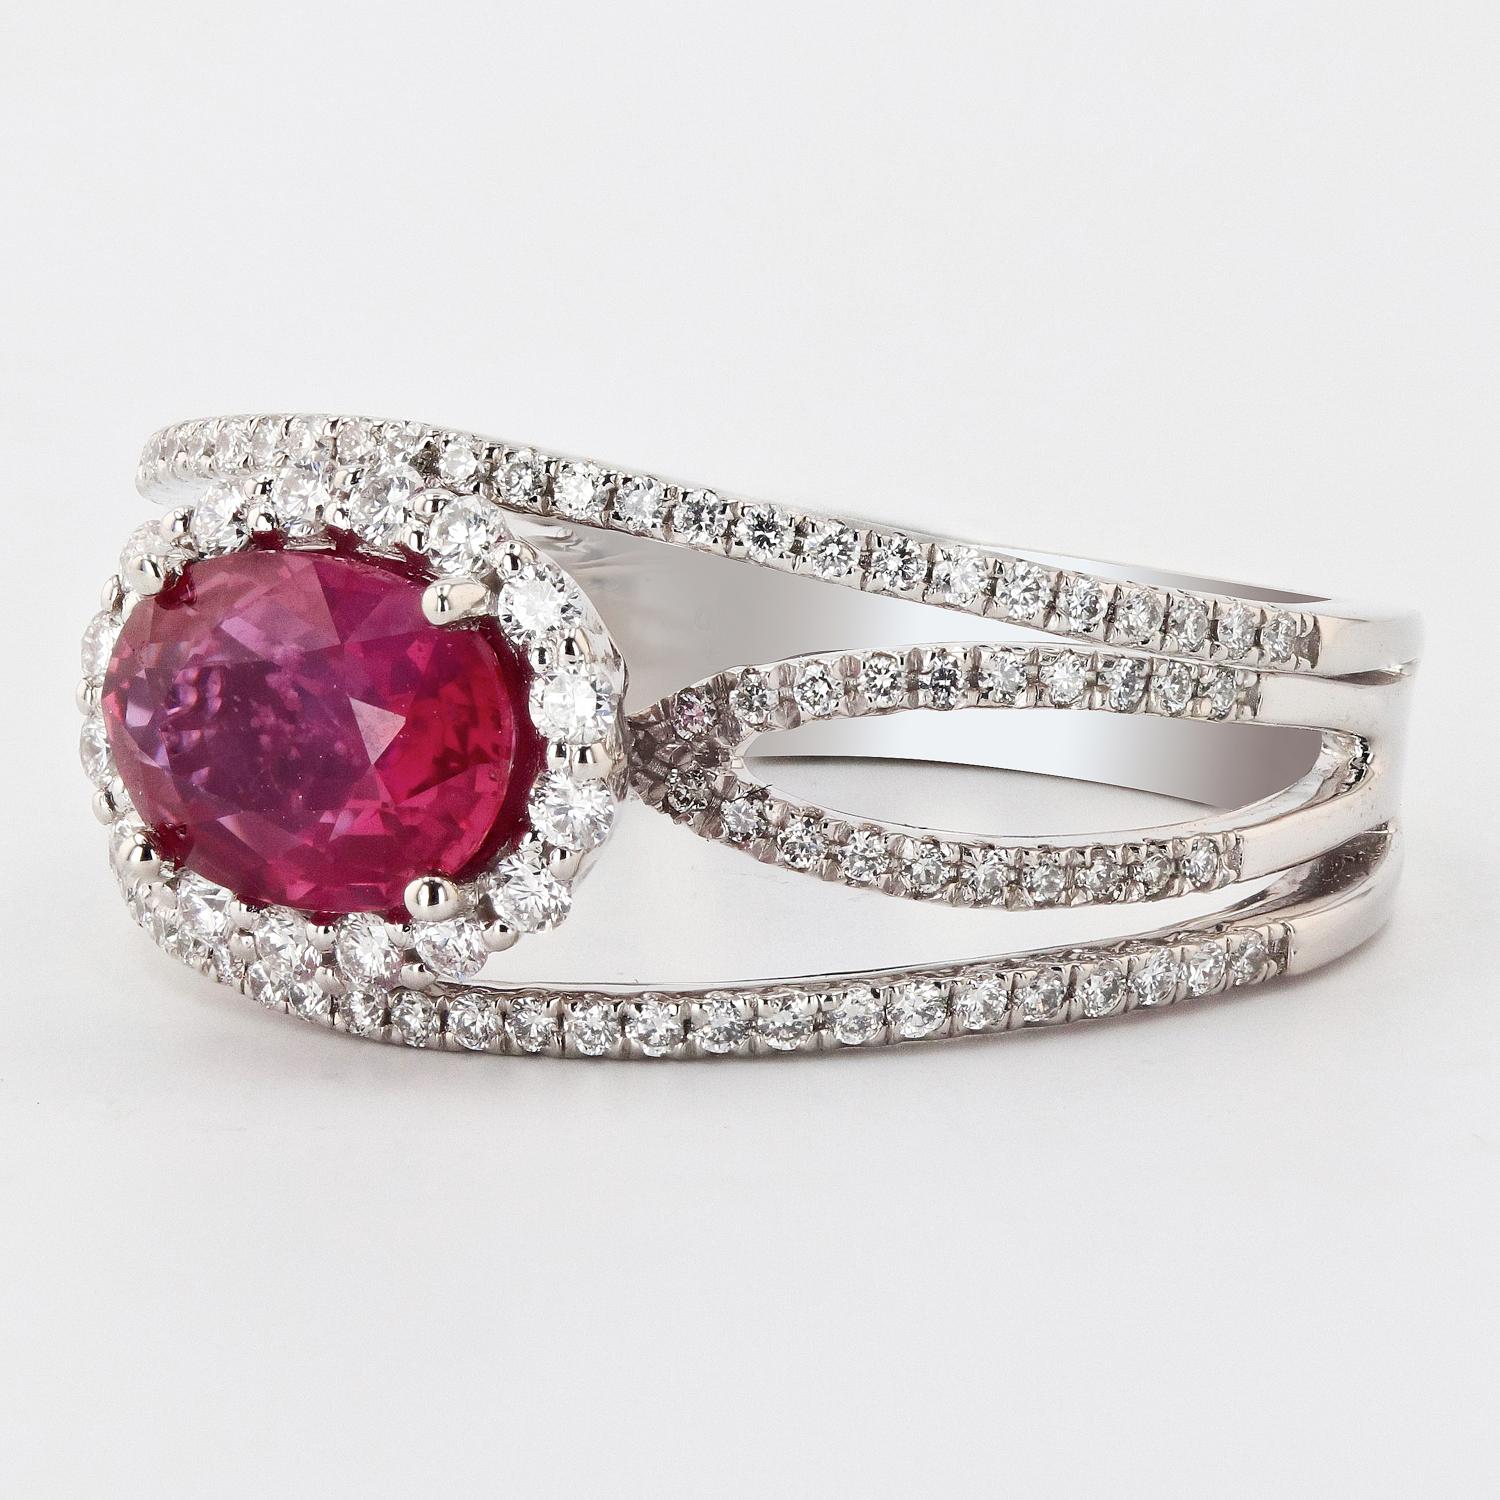 One electronically tested platinum ladies cast & assembled purplish pink sapphire & diamond ring. Condition is new, good workmanship. 

The featured sapphire is set within a diamond bezel, supported by a ribbed under gallery and diamond ribbons,